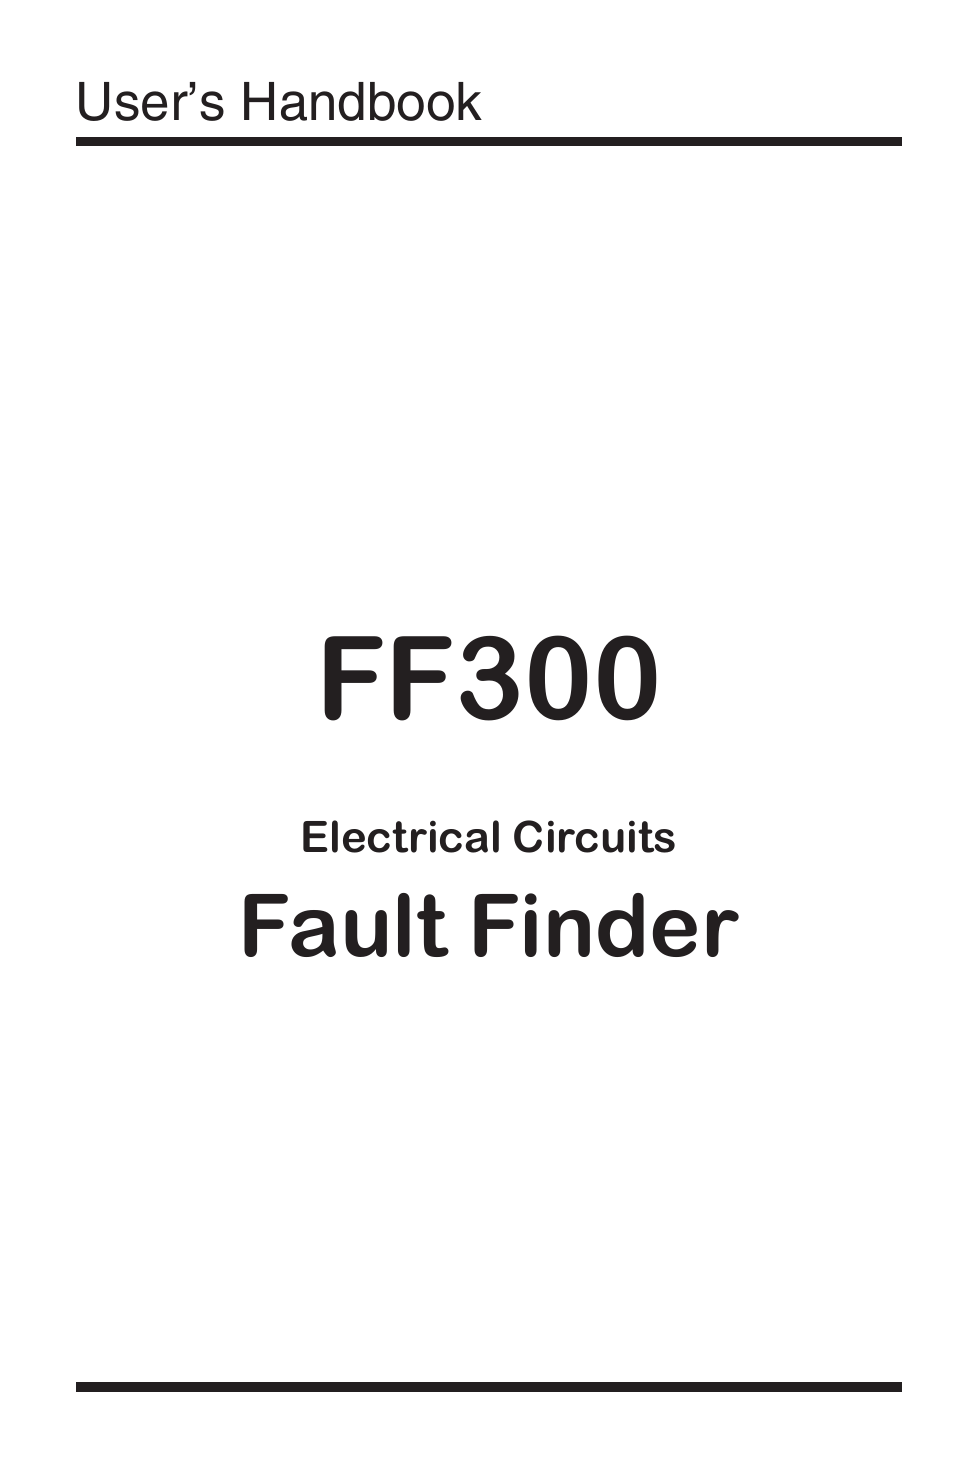 FF300 Fault Finder for Electrical Wiring Open / Short Circuit